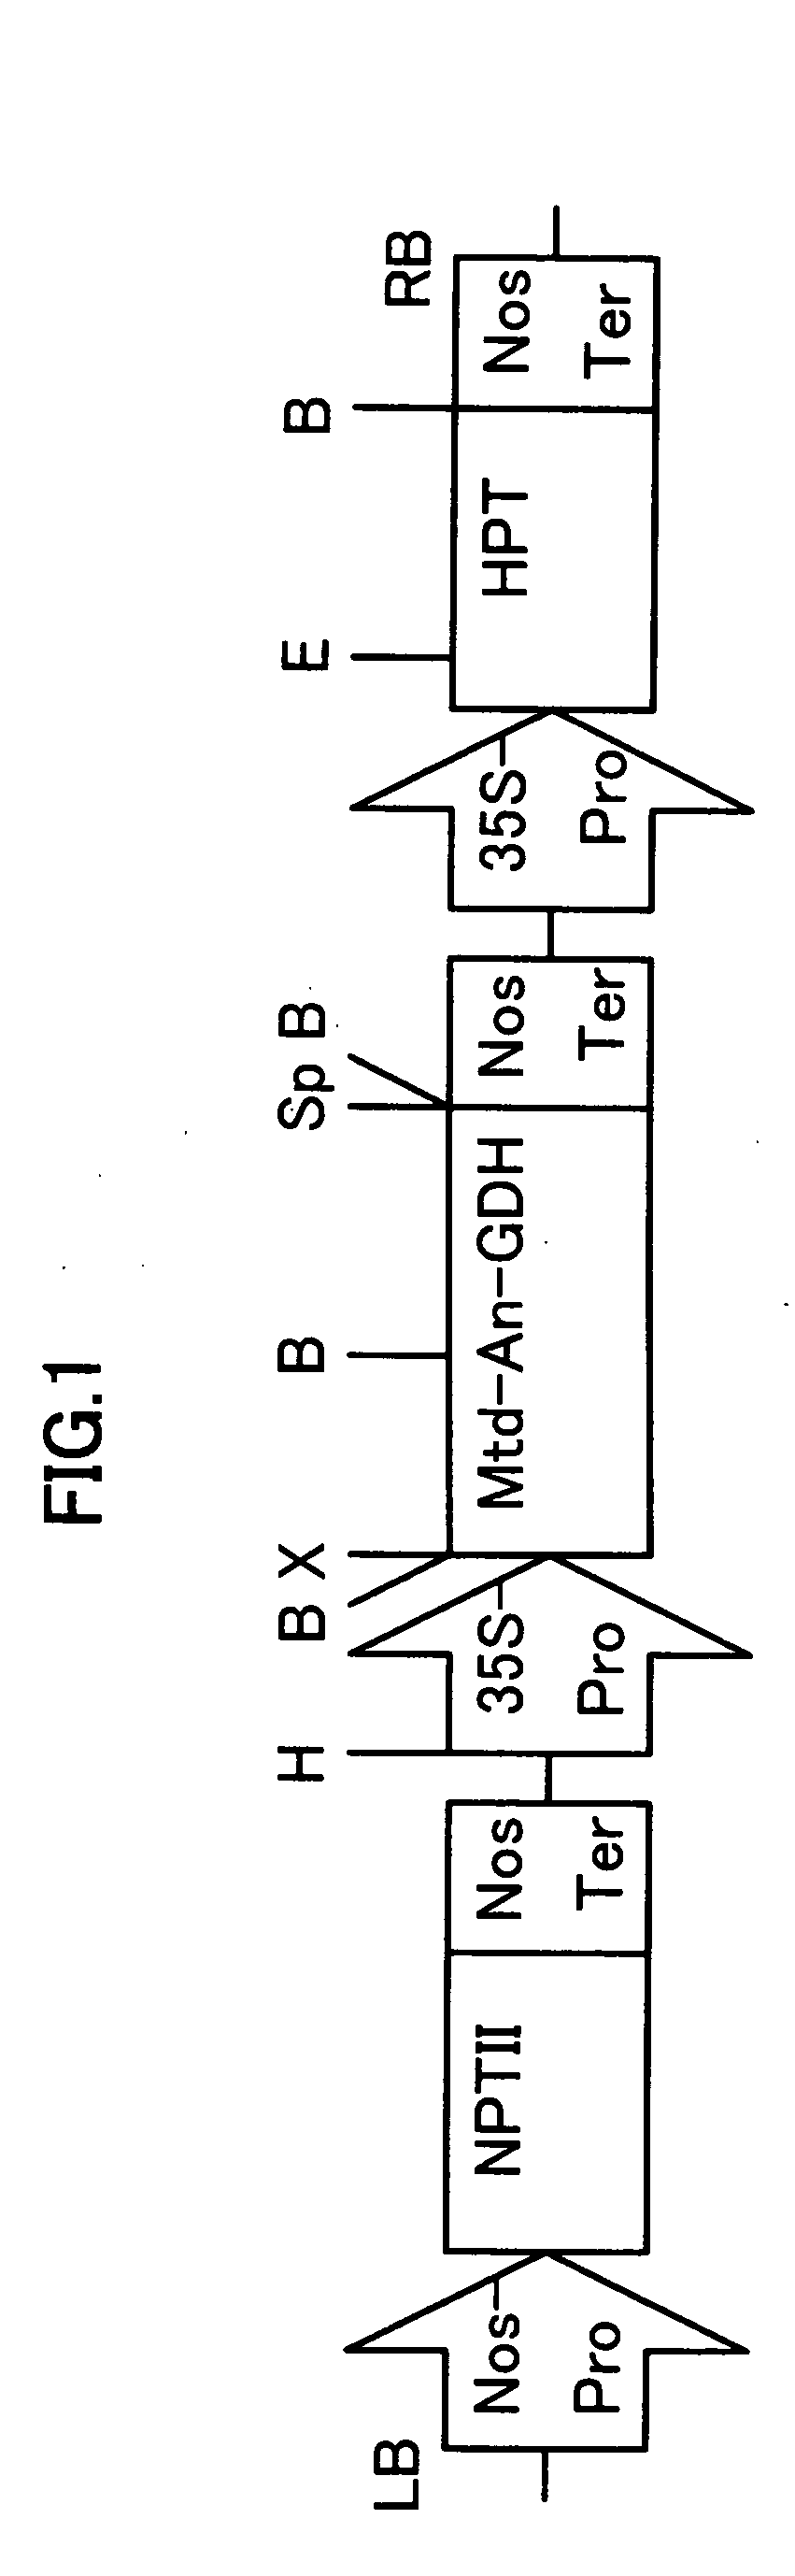 Methods for producing plants with improved growth under nitrogen-limited conditions